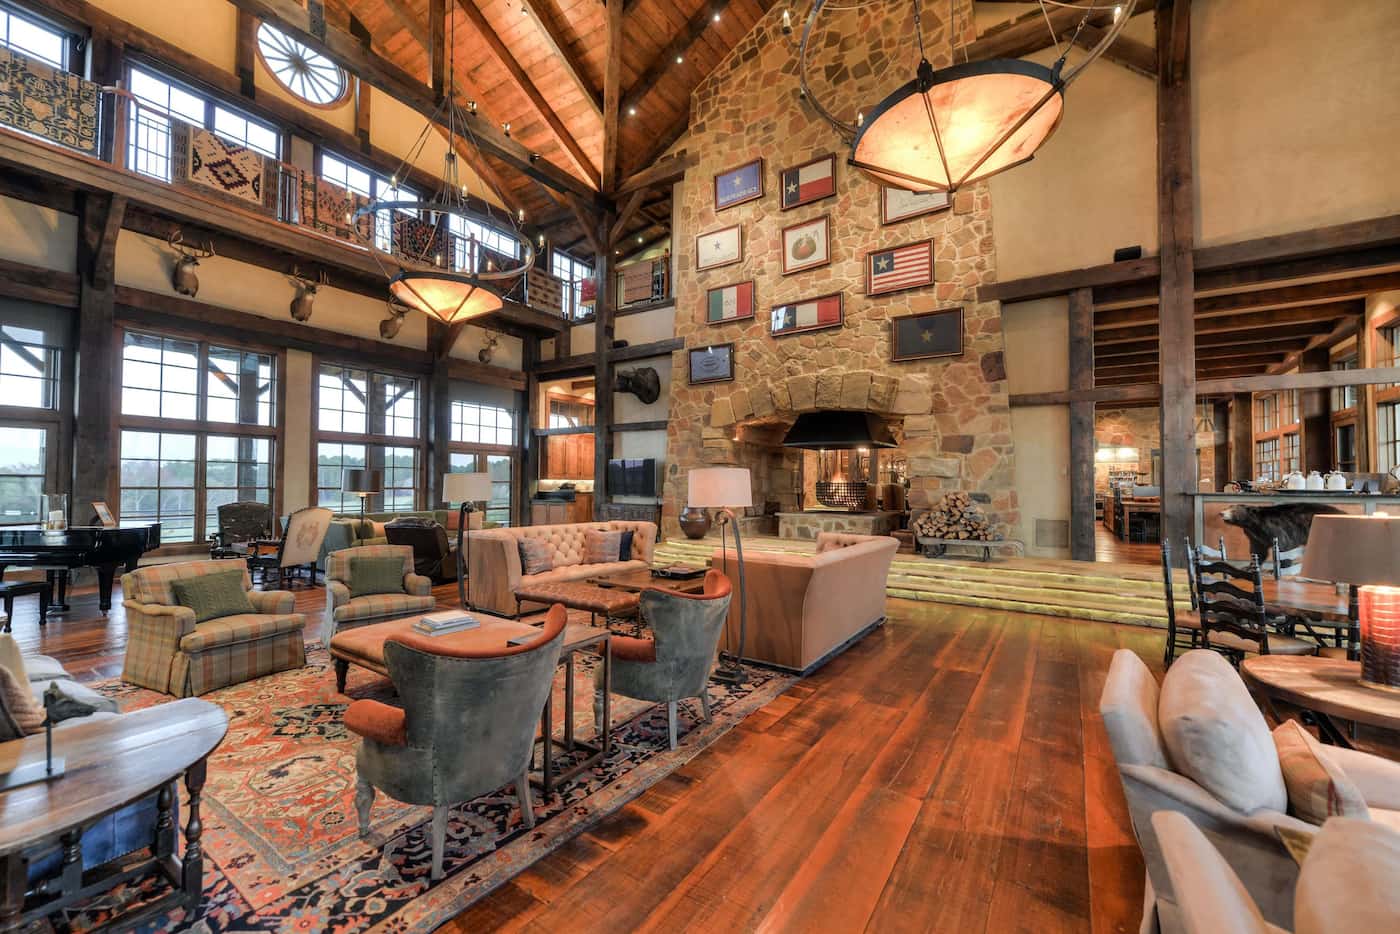 Barefoot Ranch has a 35,000-square-foot, timber-beamed lodge, golf course, boat house,...